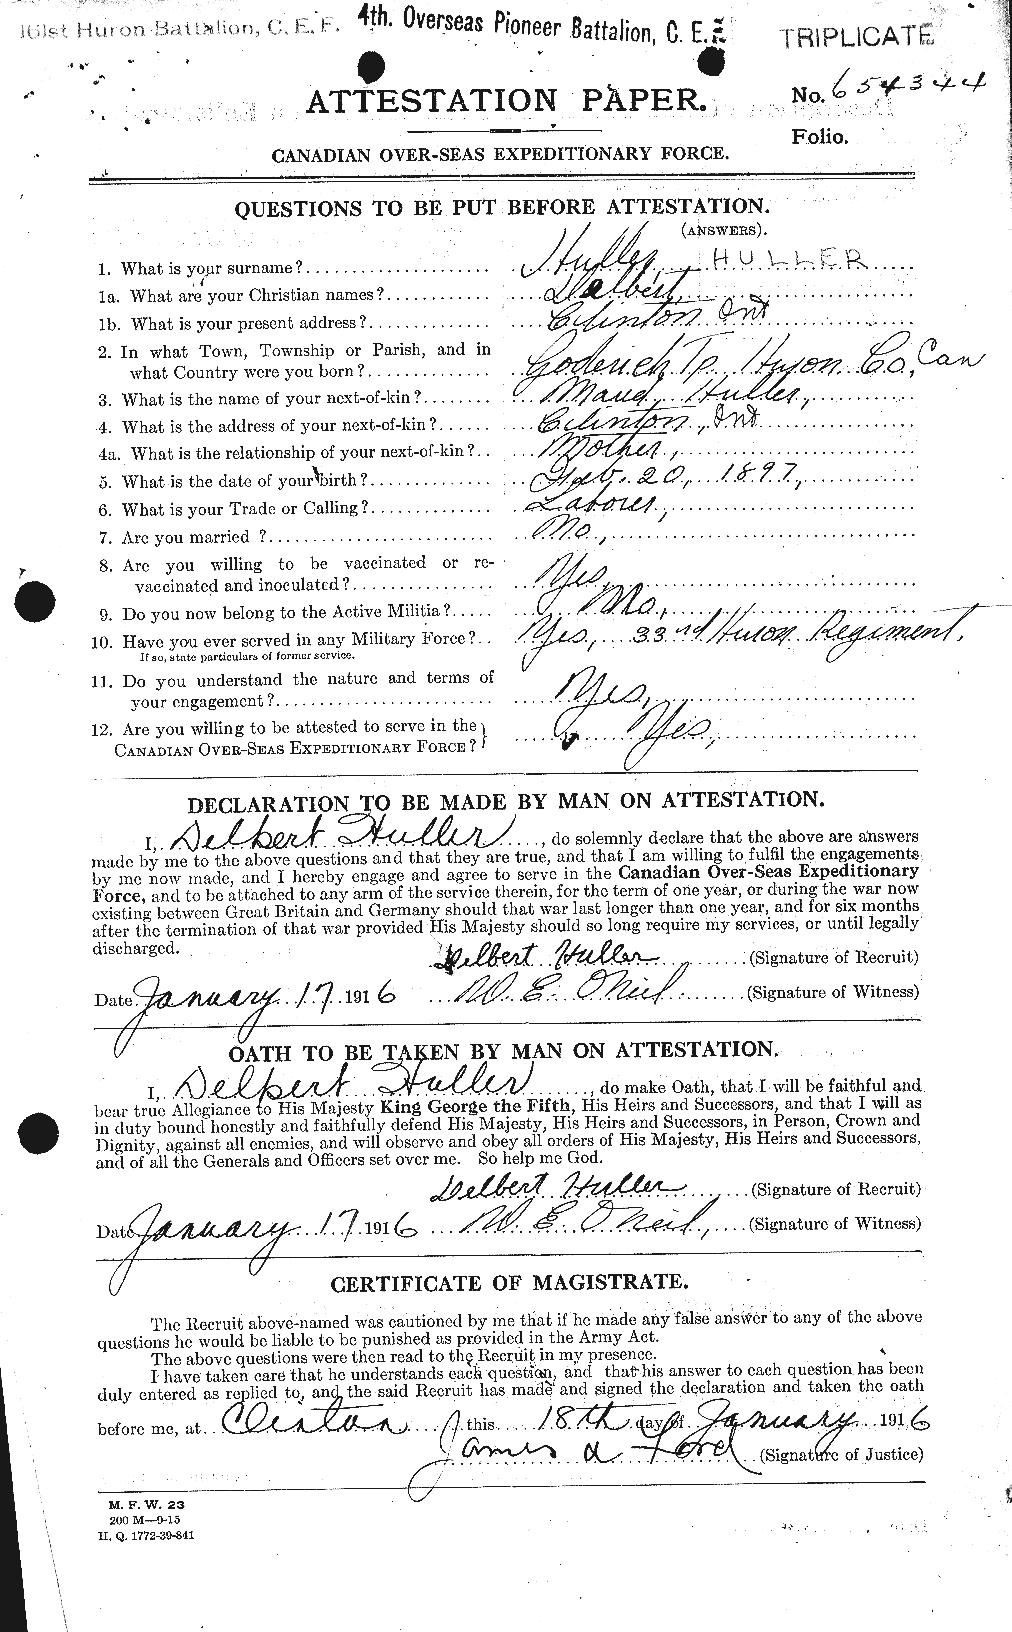 Personnel Records of the First World War - CEF 406183a